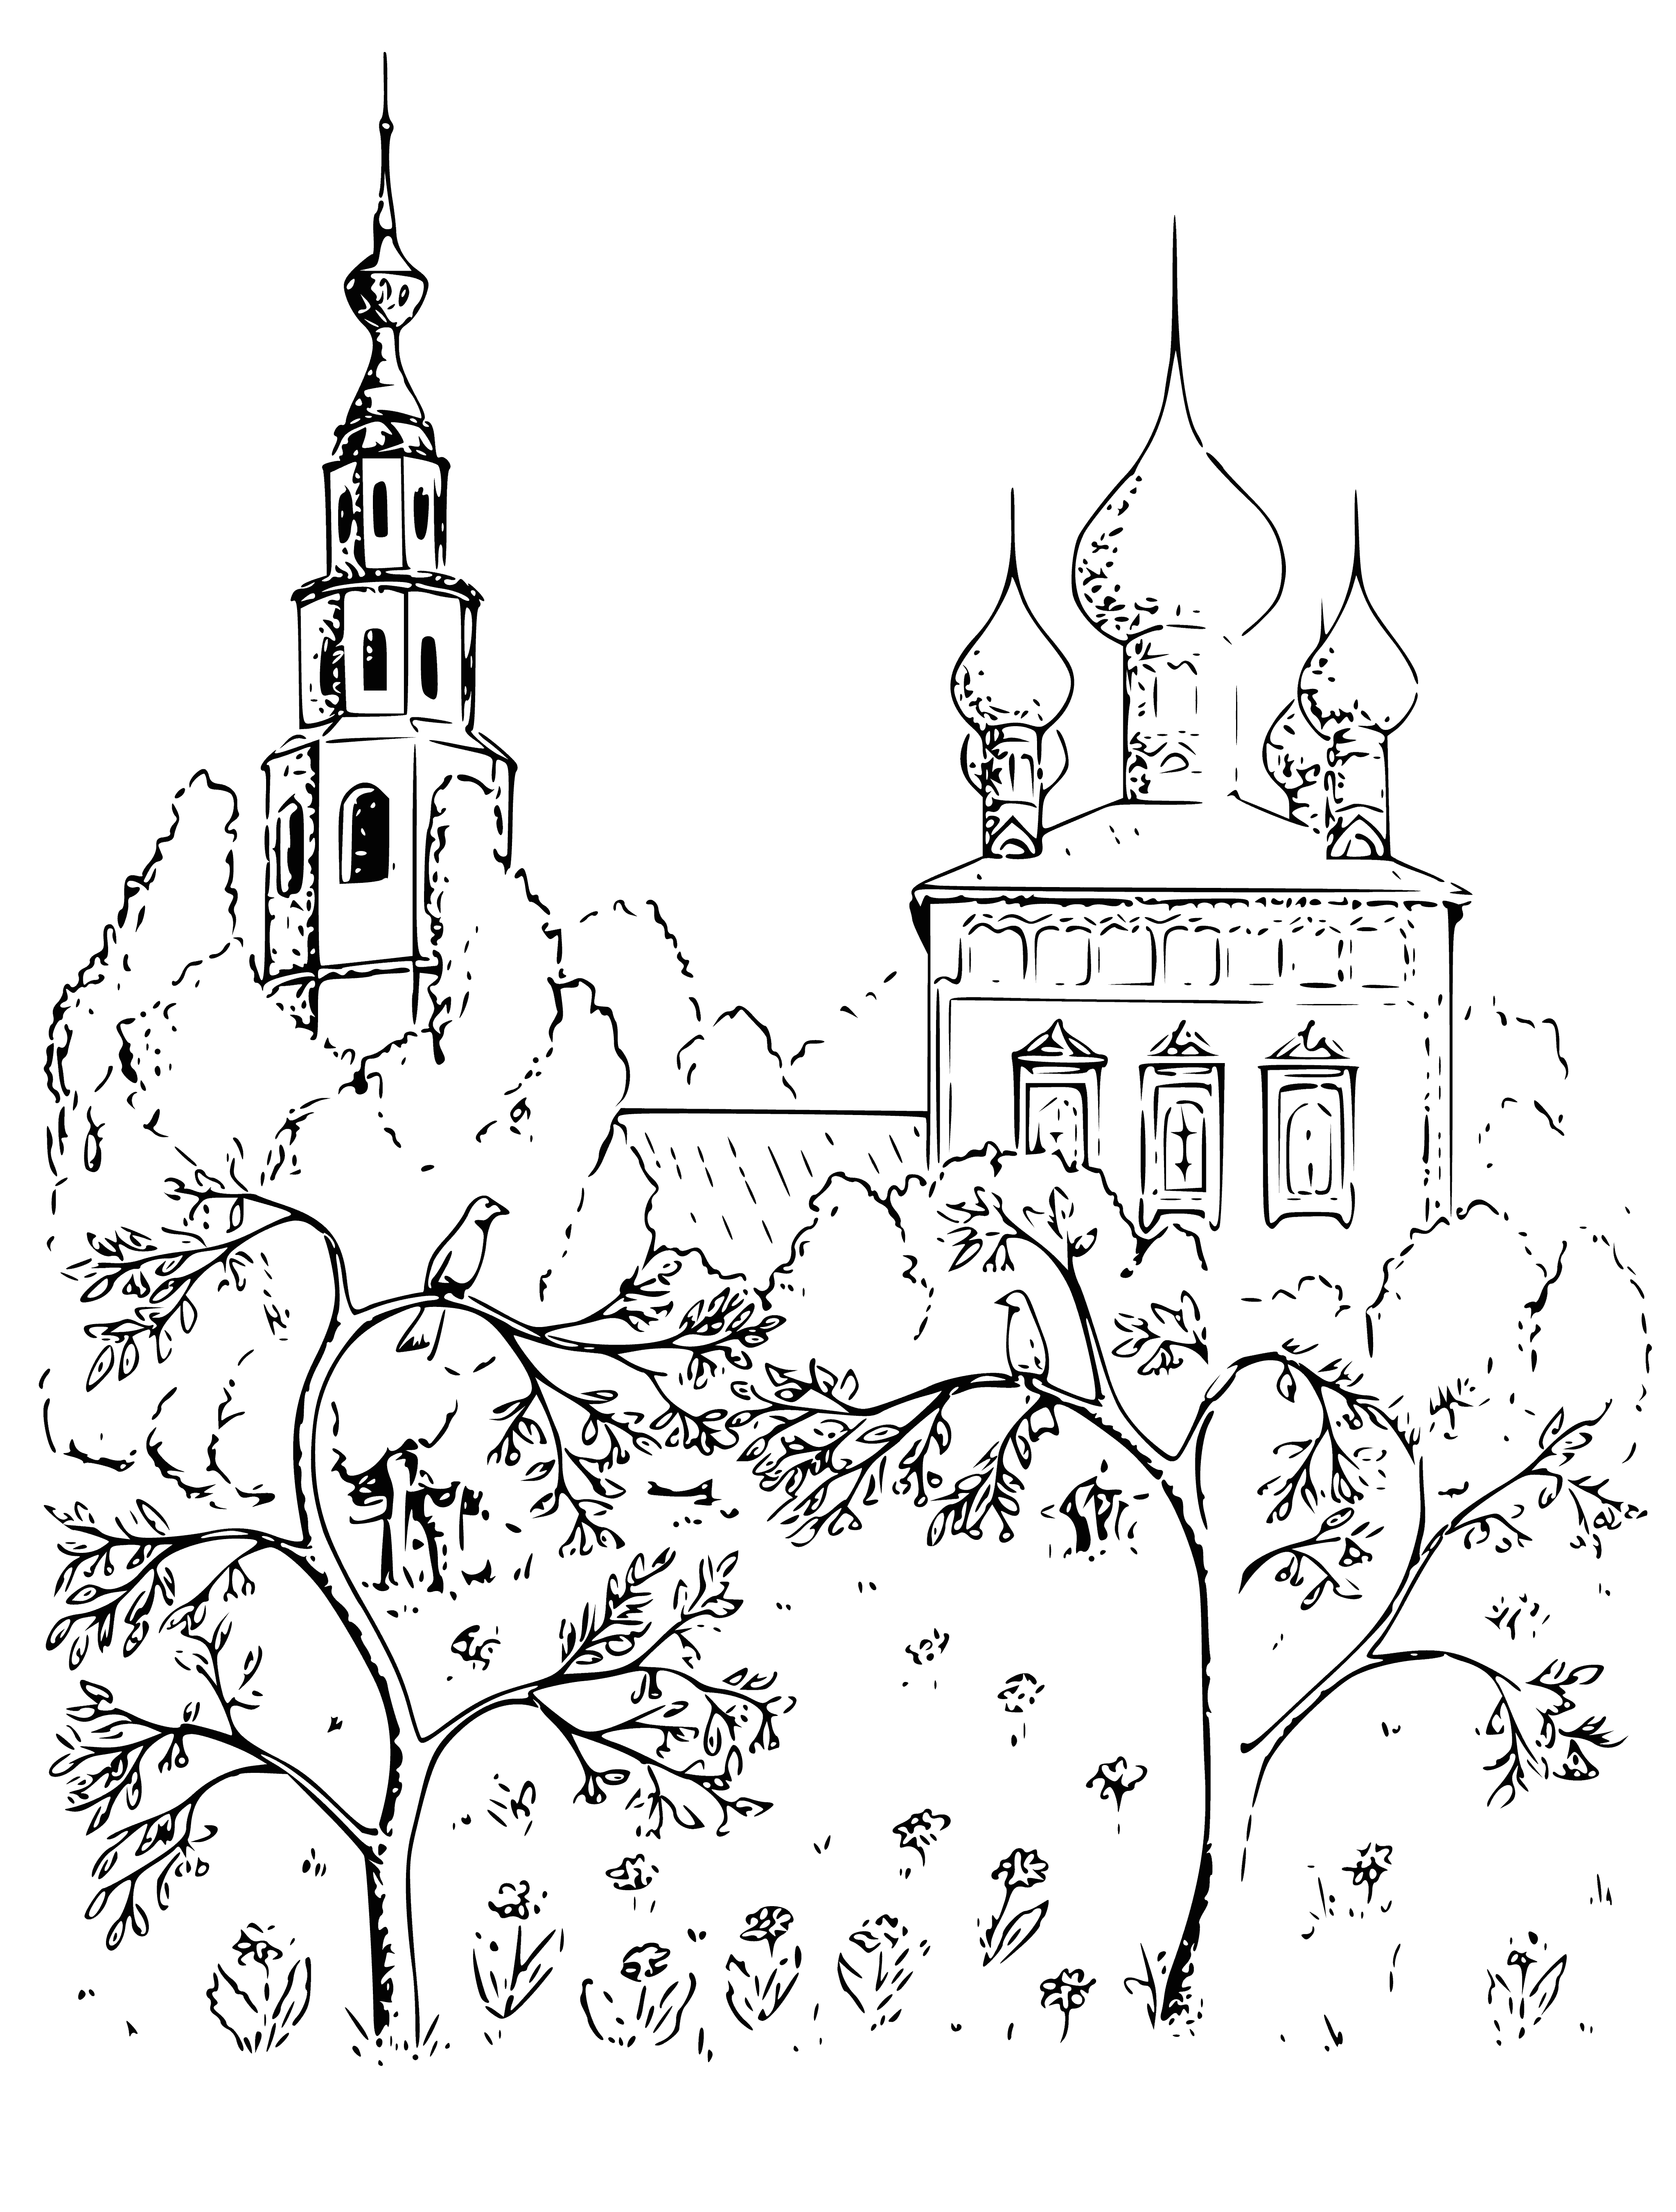 coloring page: Coloring page of single storey grey church with white cross and trees; background of body of water. #coloringpages #church